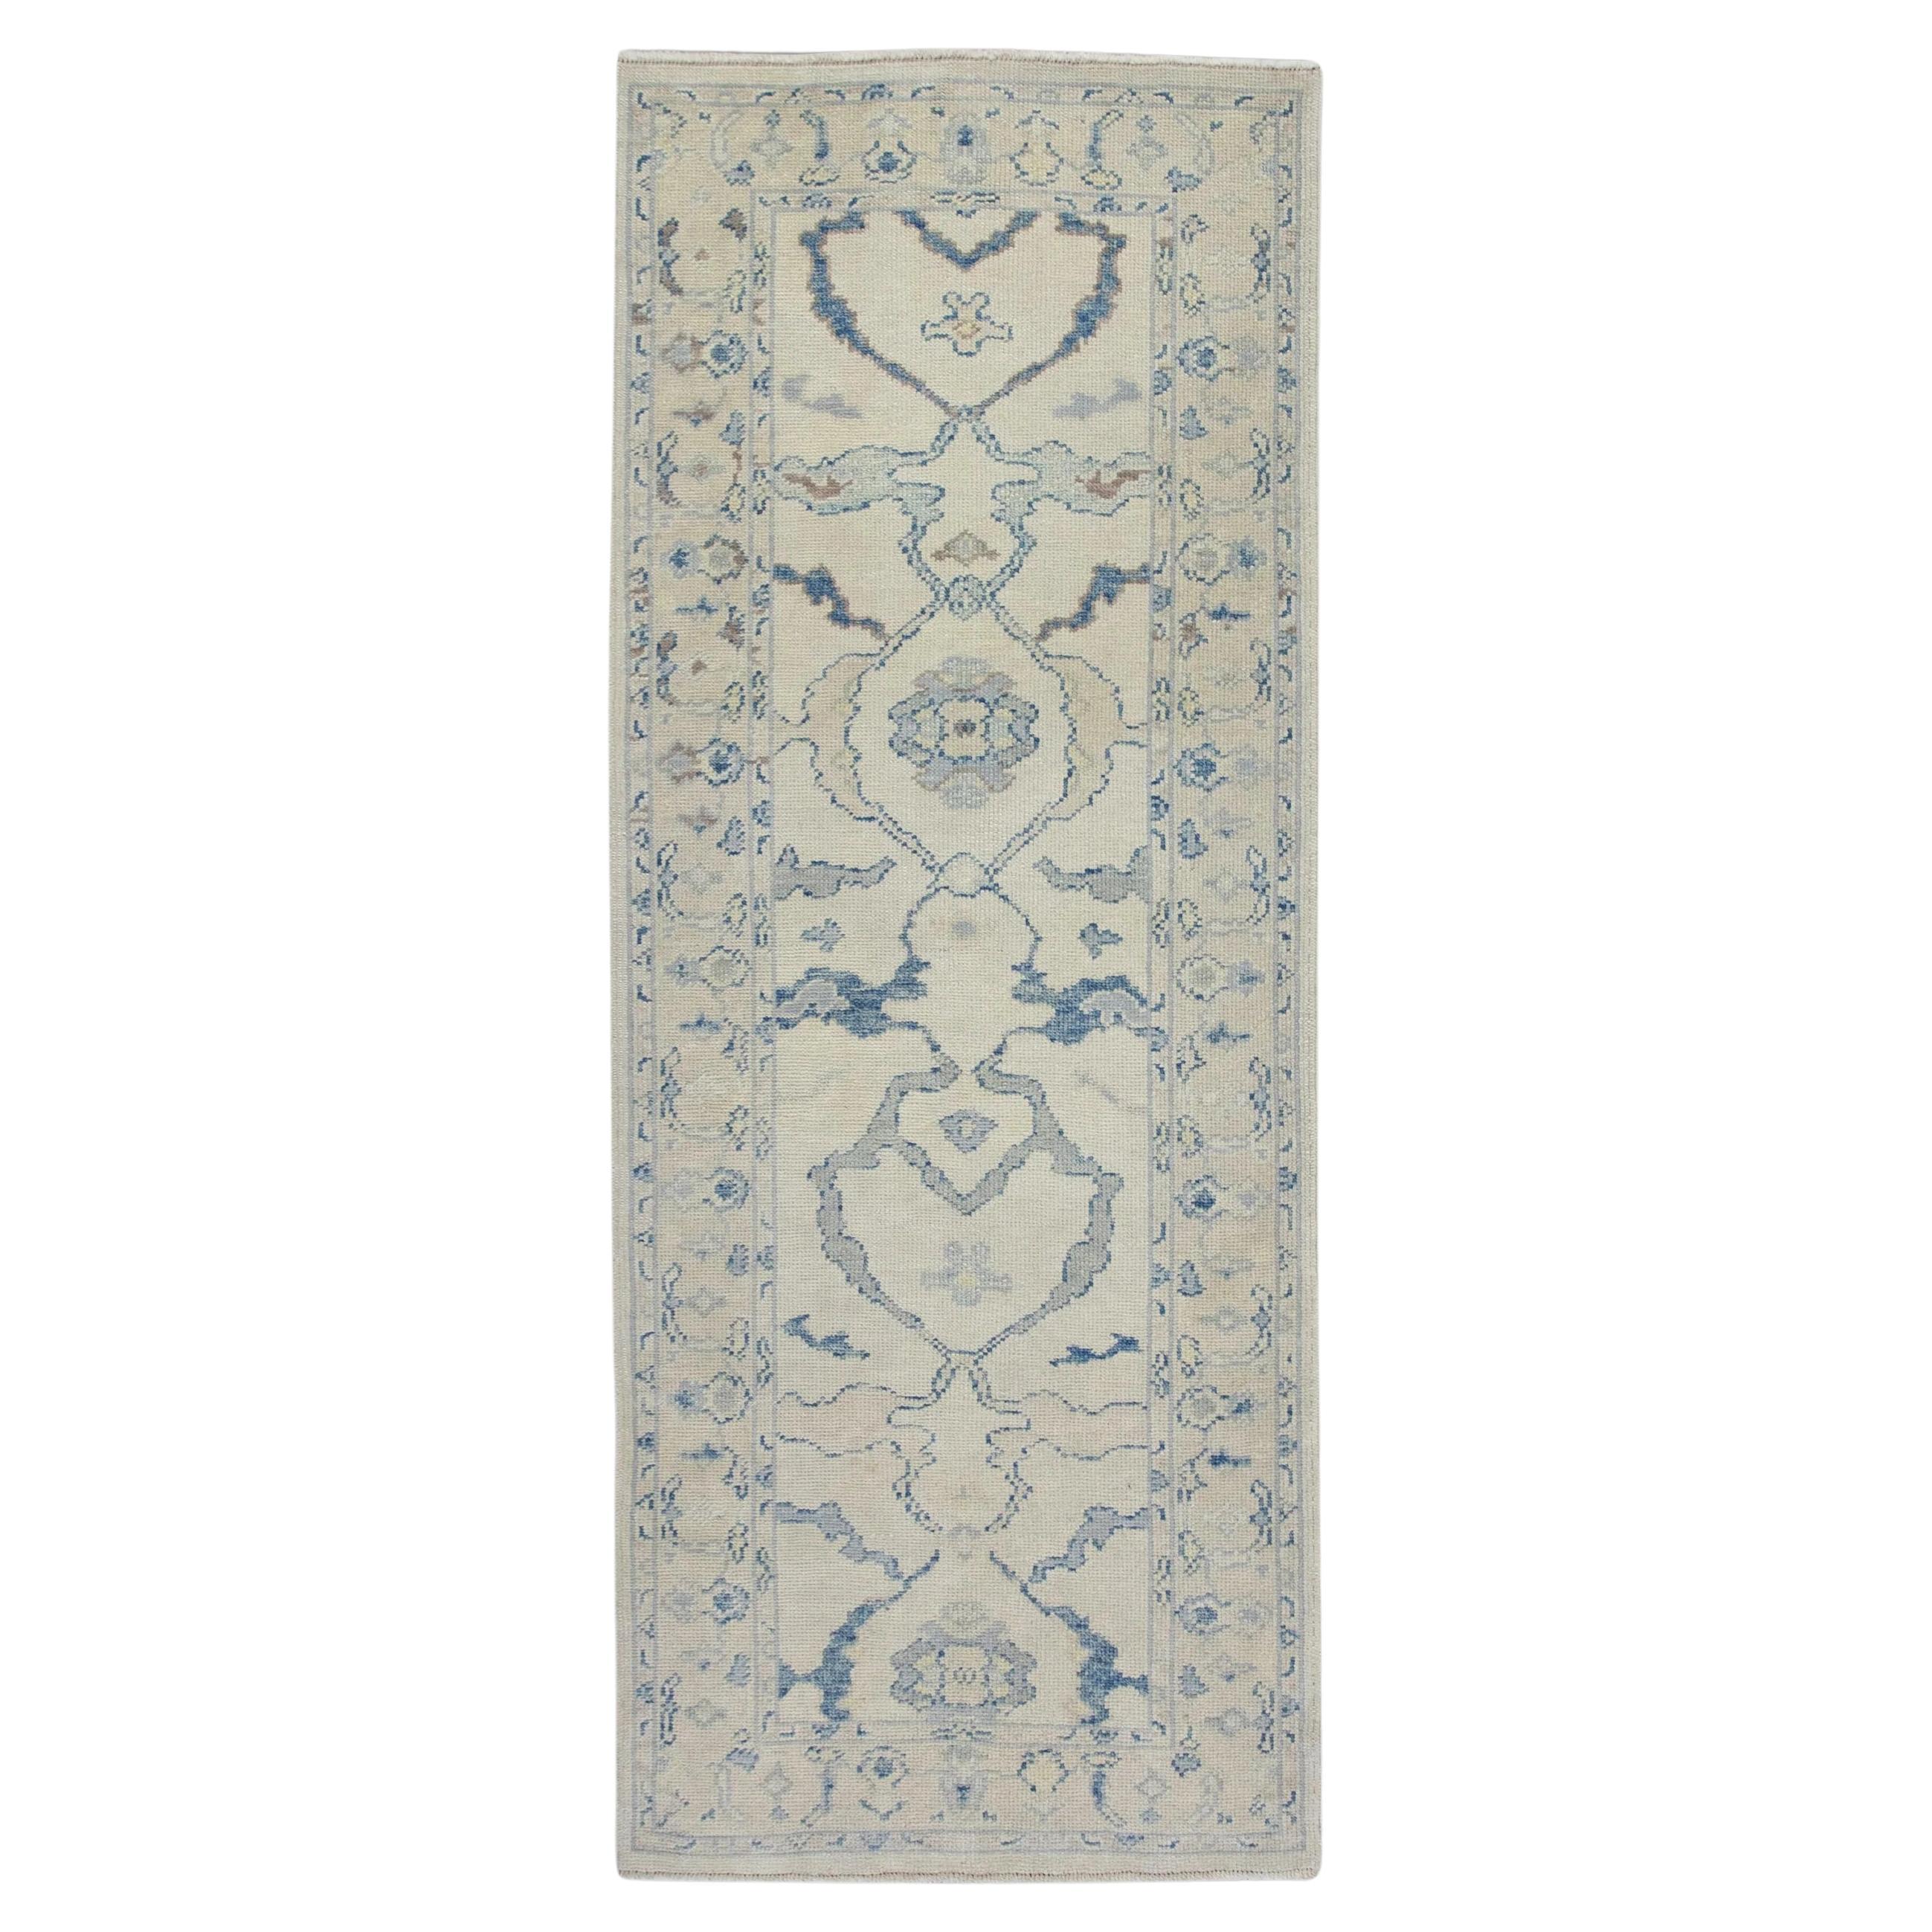 Cream and Blue Floral Handwoven Wool Turkish Oushak Rug 3'1" x 7'4" For Sale